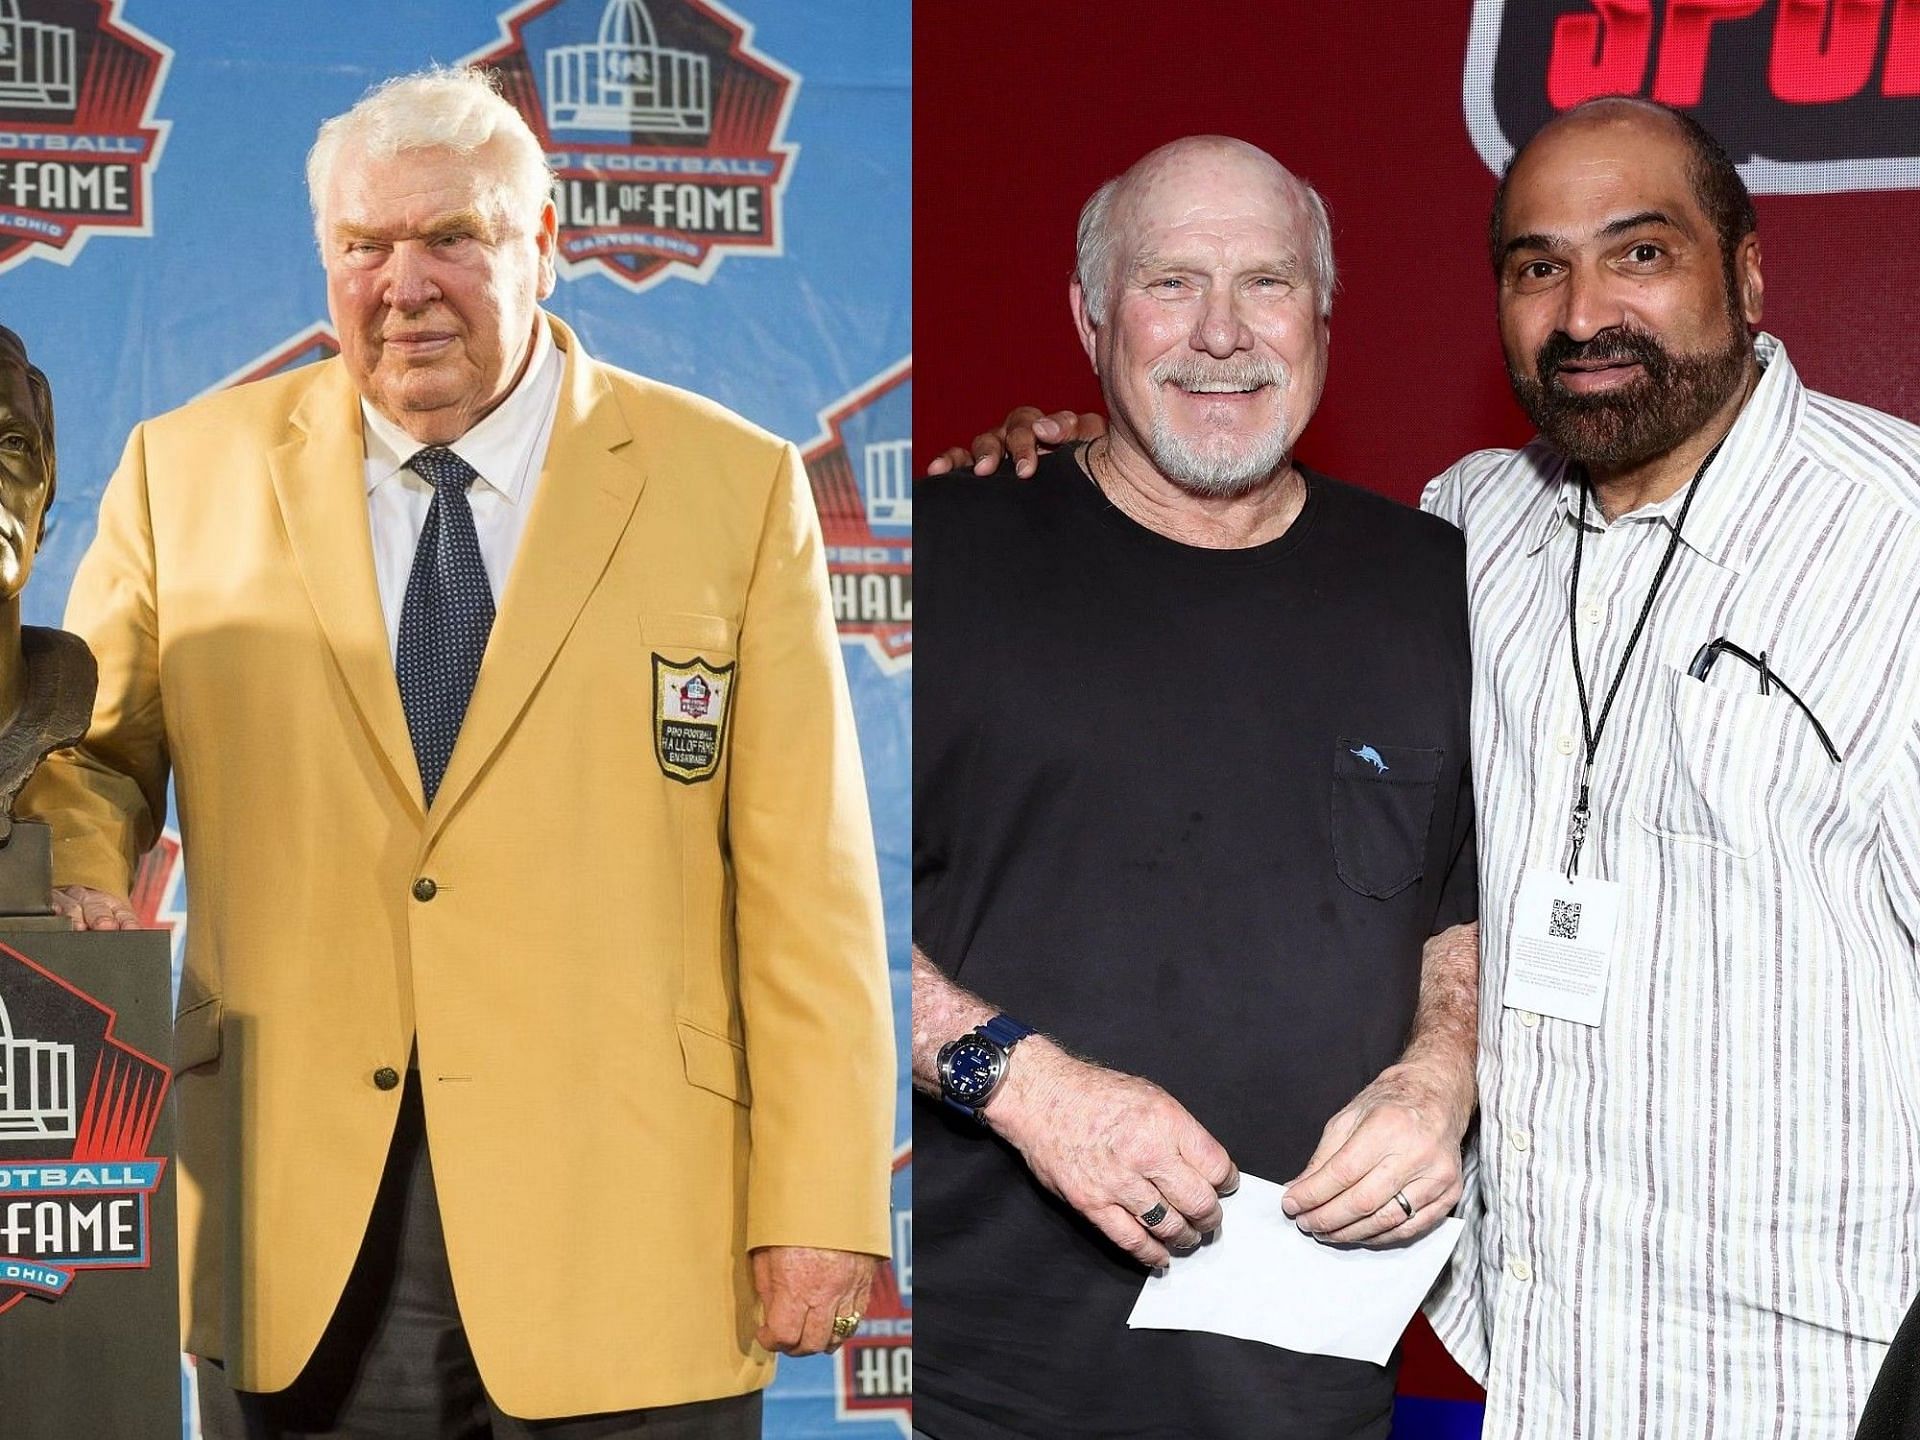 That's unfortunate” – Terry Bradshaw claims John Madden never “got over”  Franco Harris' Immaculate Reception